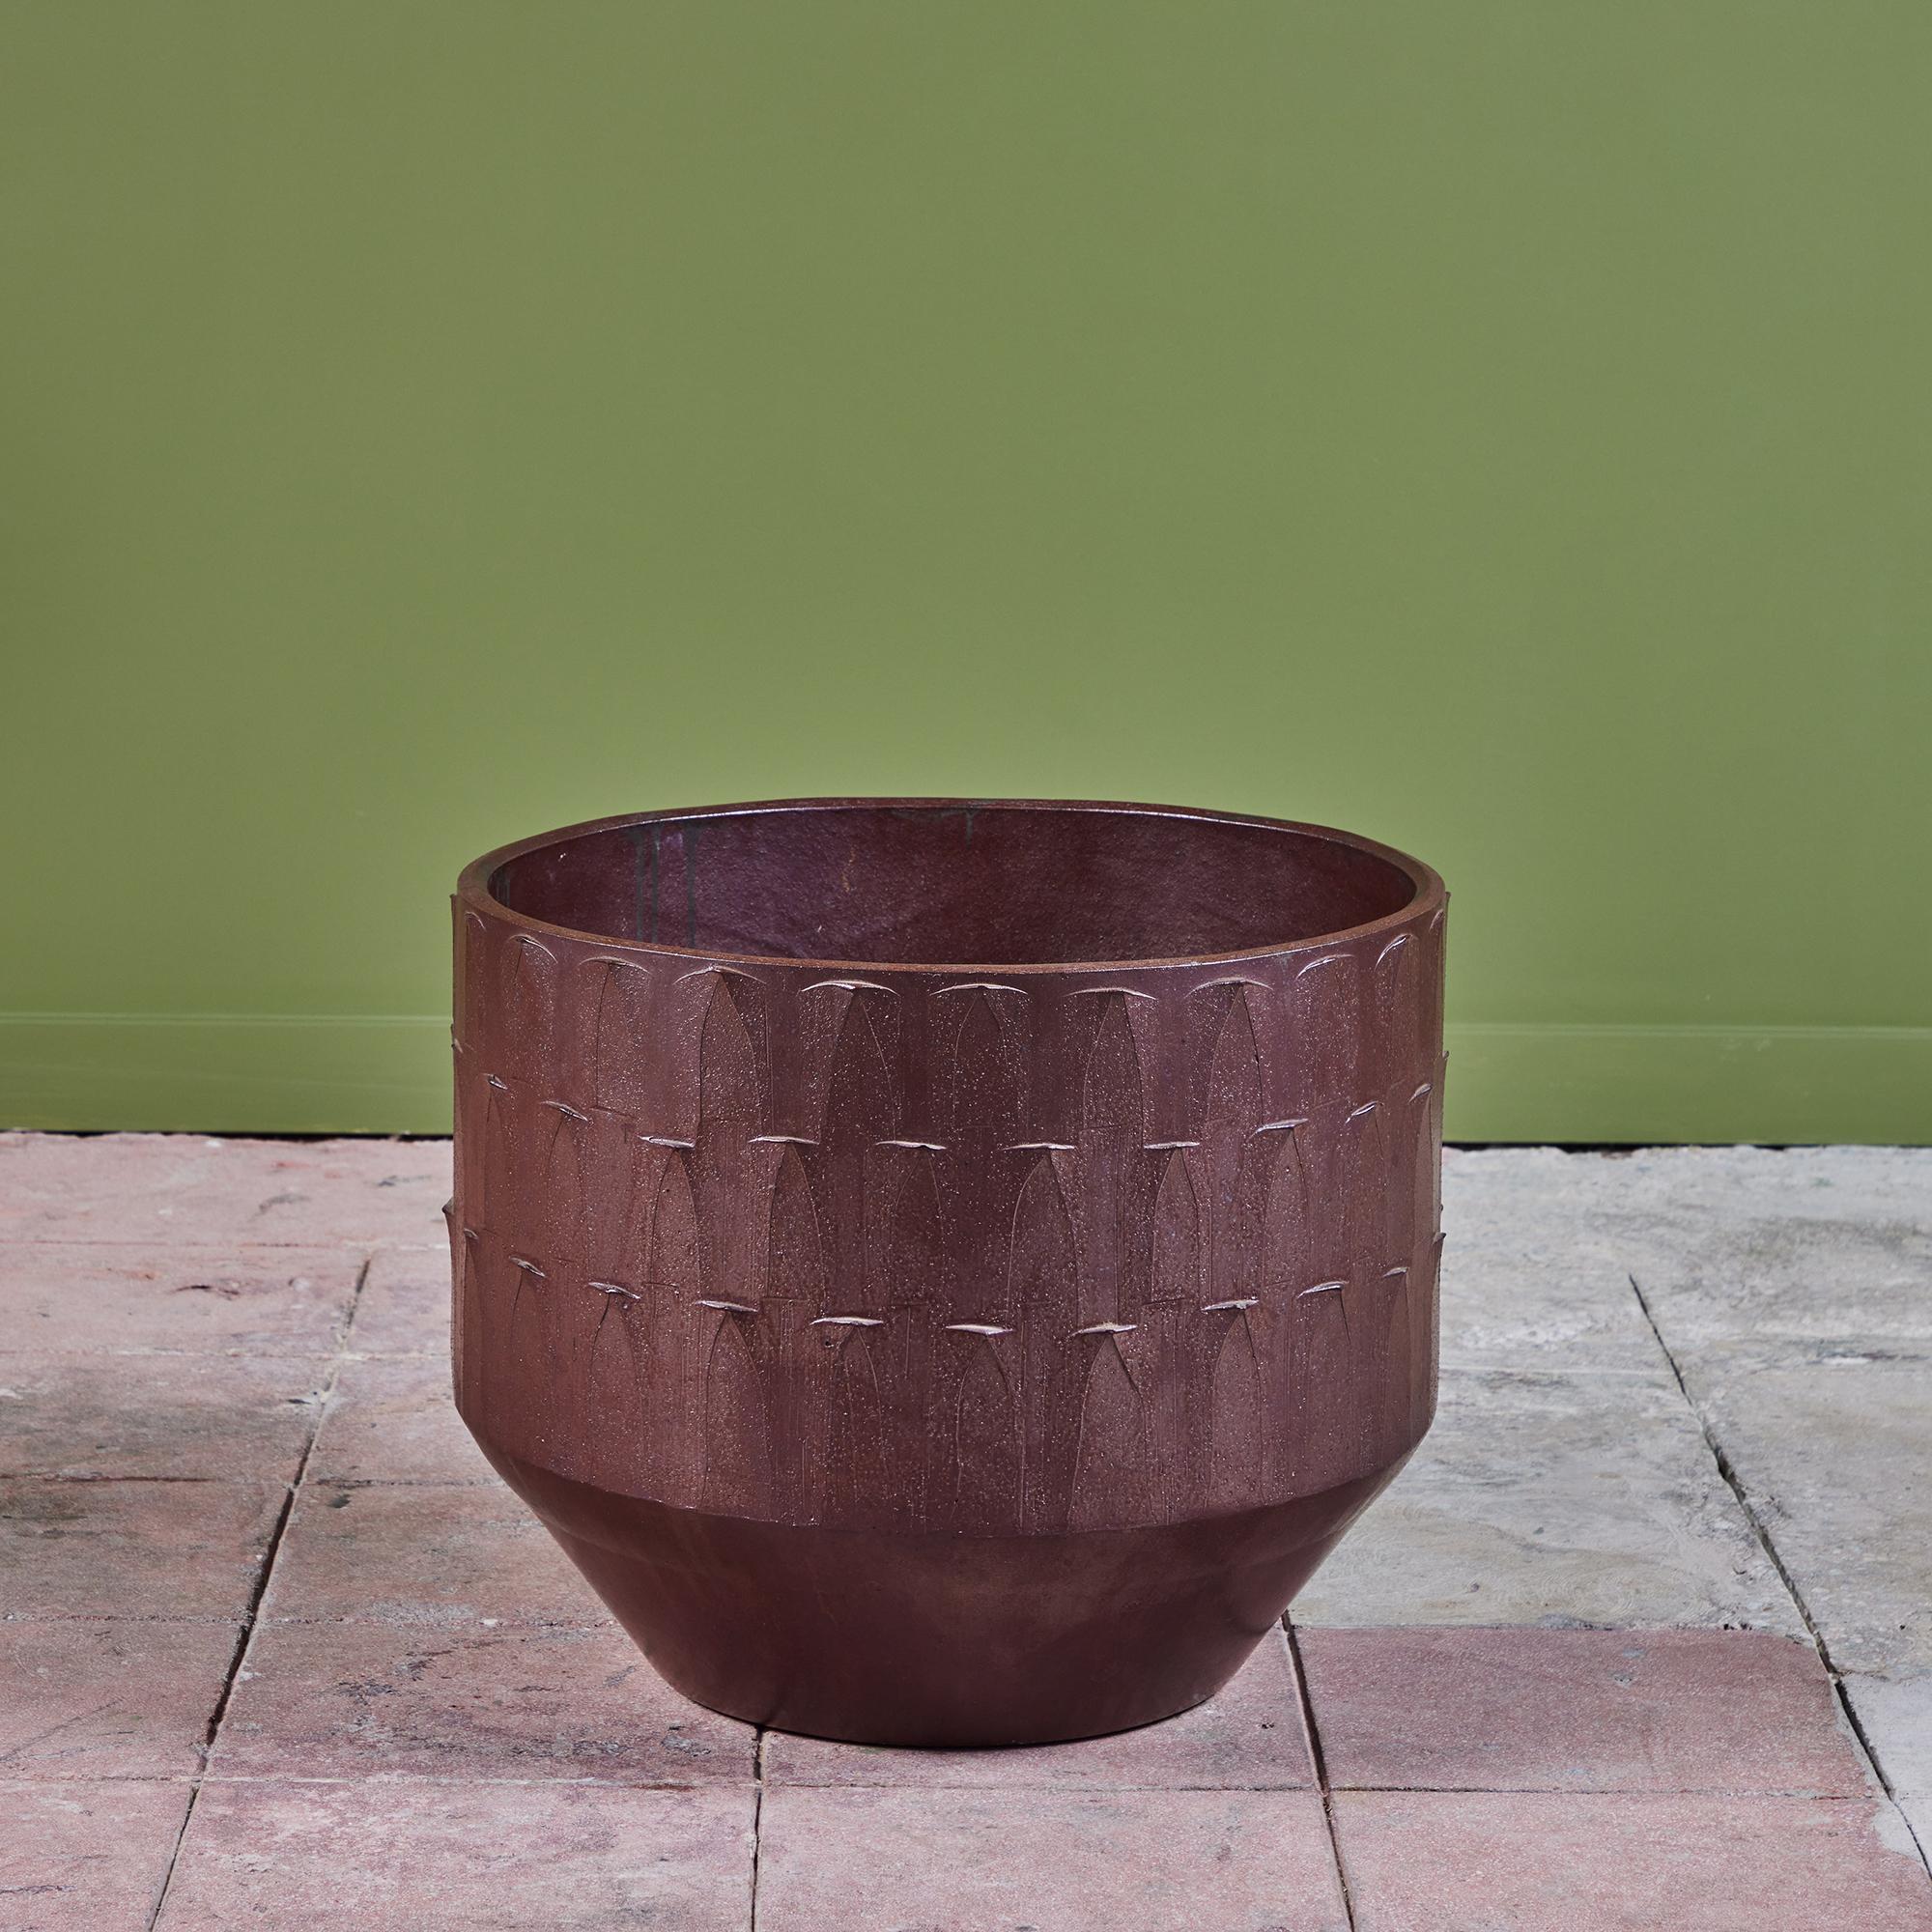 Bullet planter by David Cressey from the Pro/Artisan collection for Architectural Pottery. This planter has a soft speckled glaze in plum on both the interior and exterior. The exterior of the planter is finished with the “ribbed”